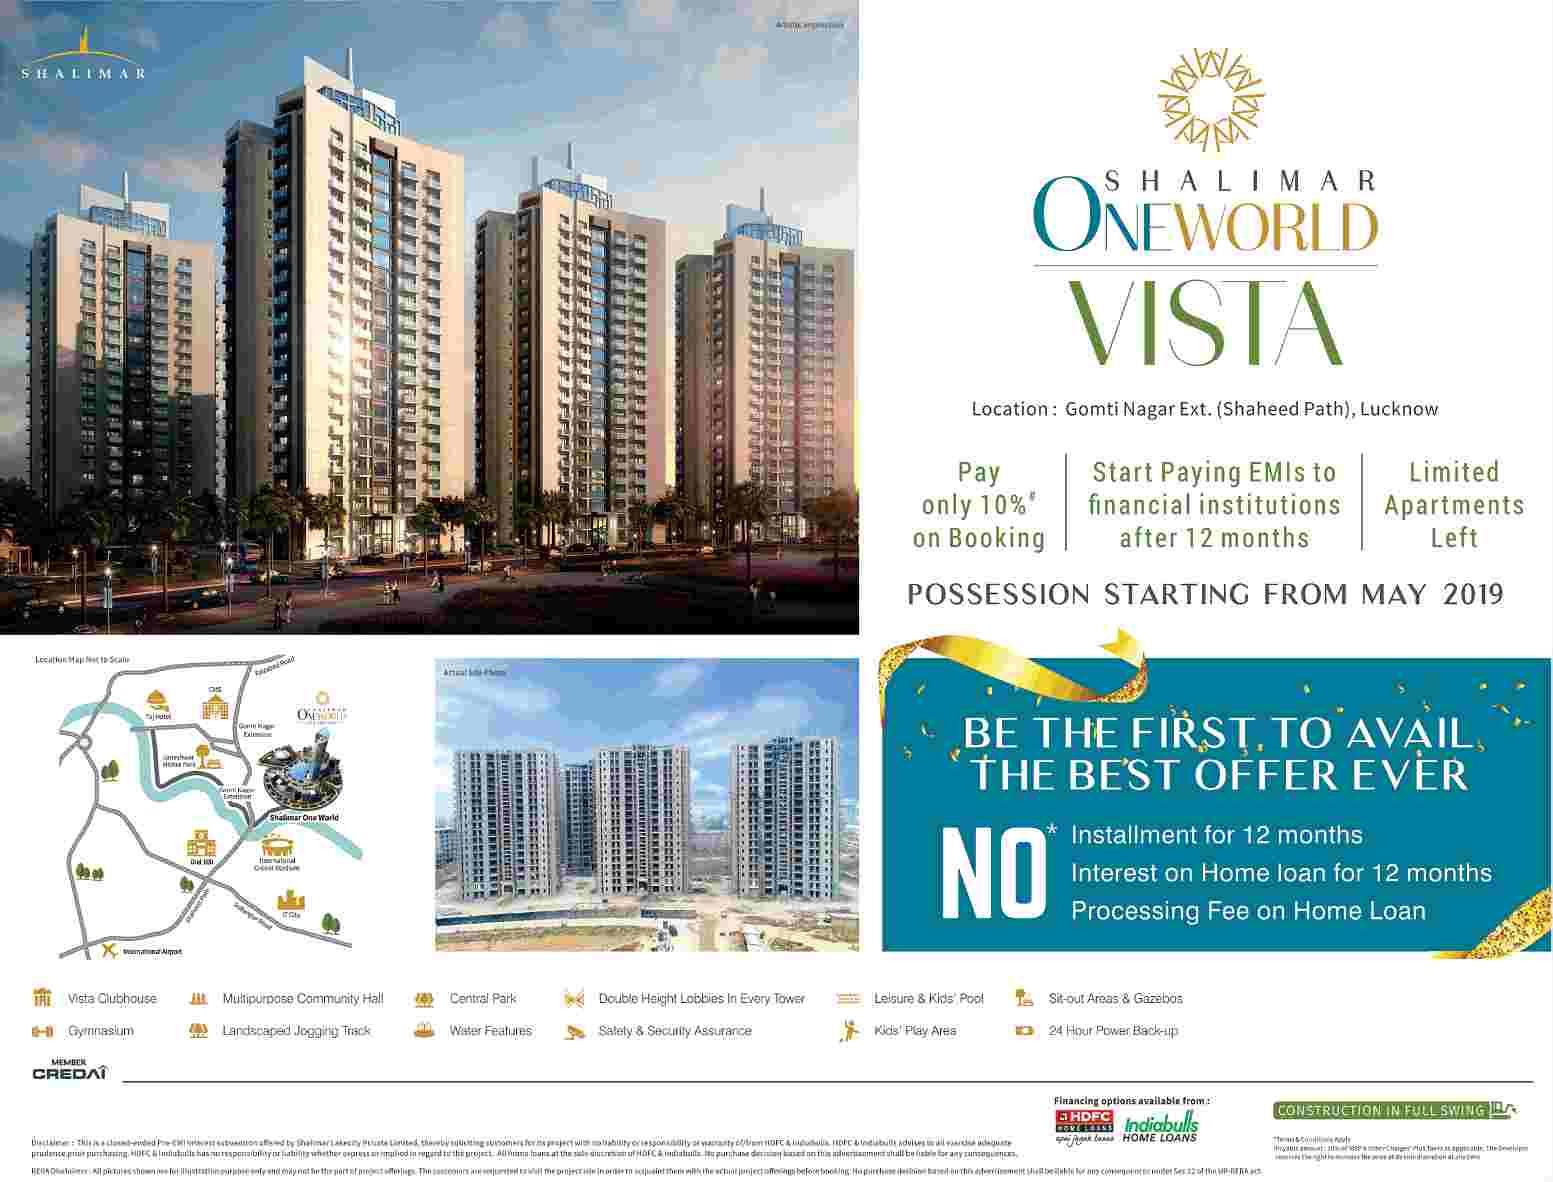 Pay only 10% on booking at Shalimar Oneworld Vista in Lucknow